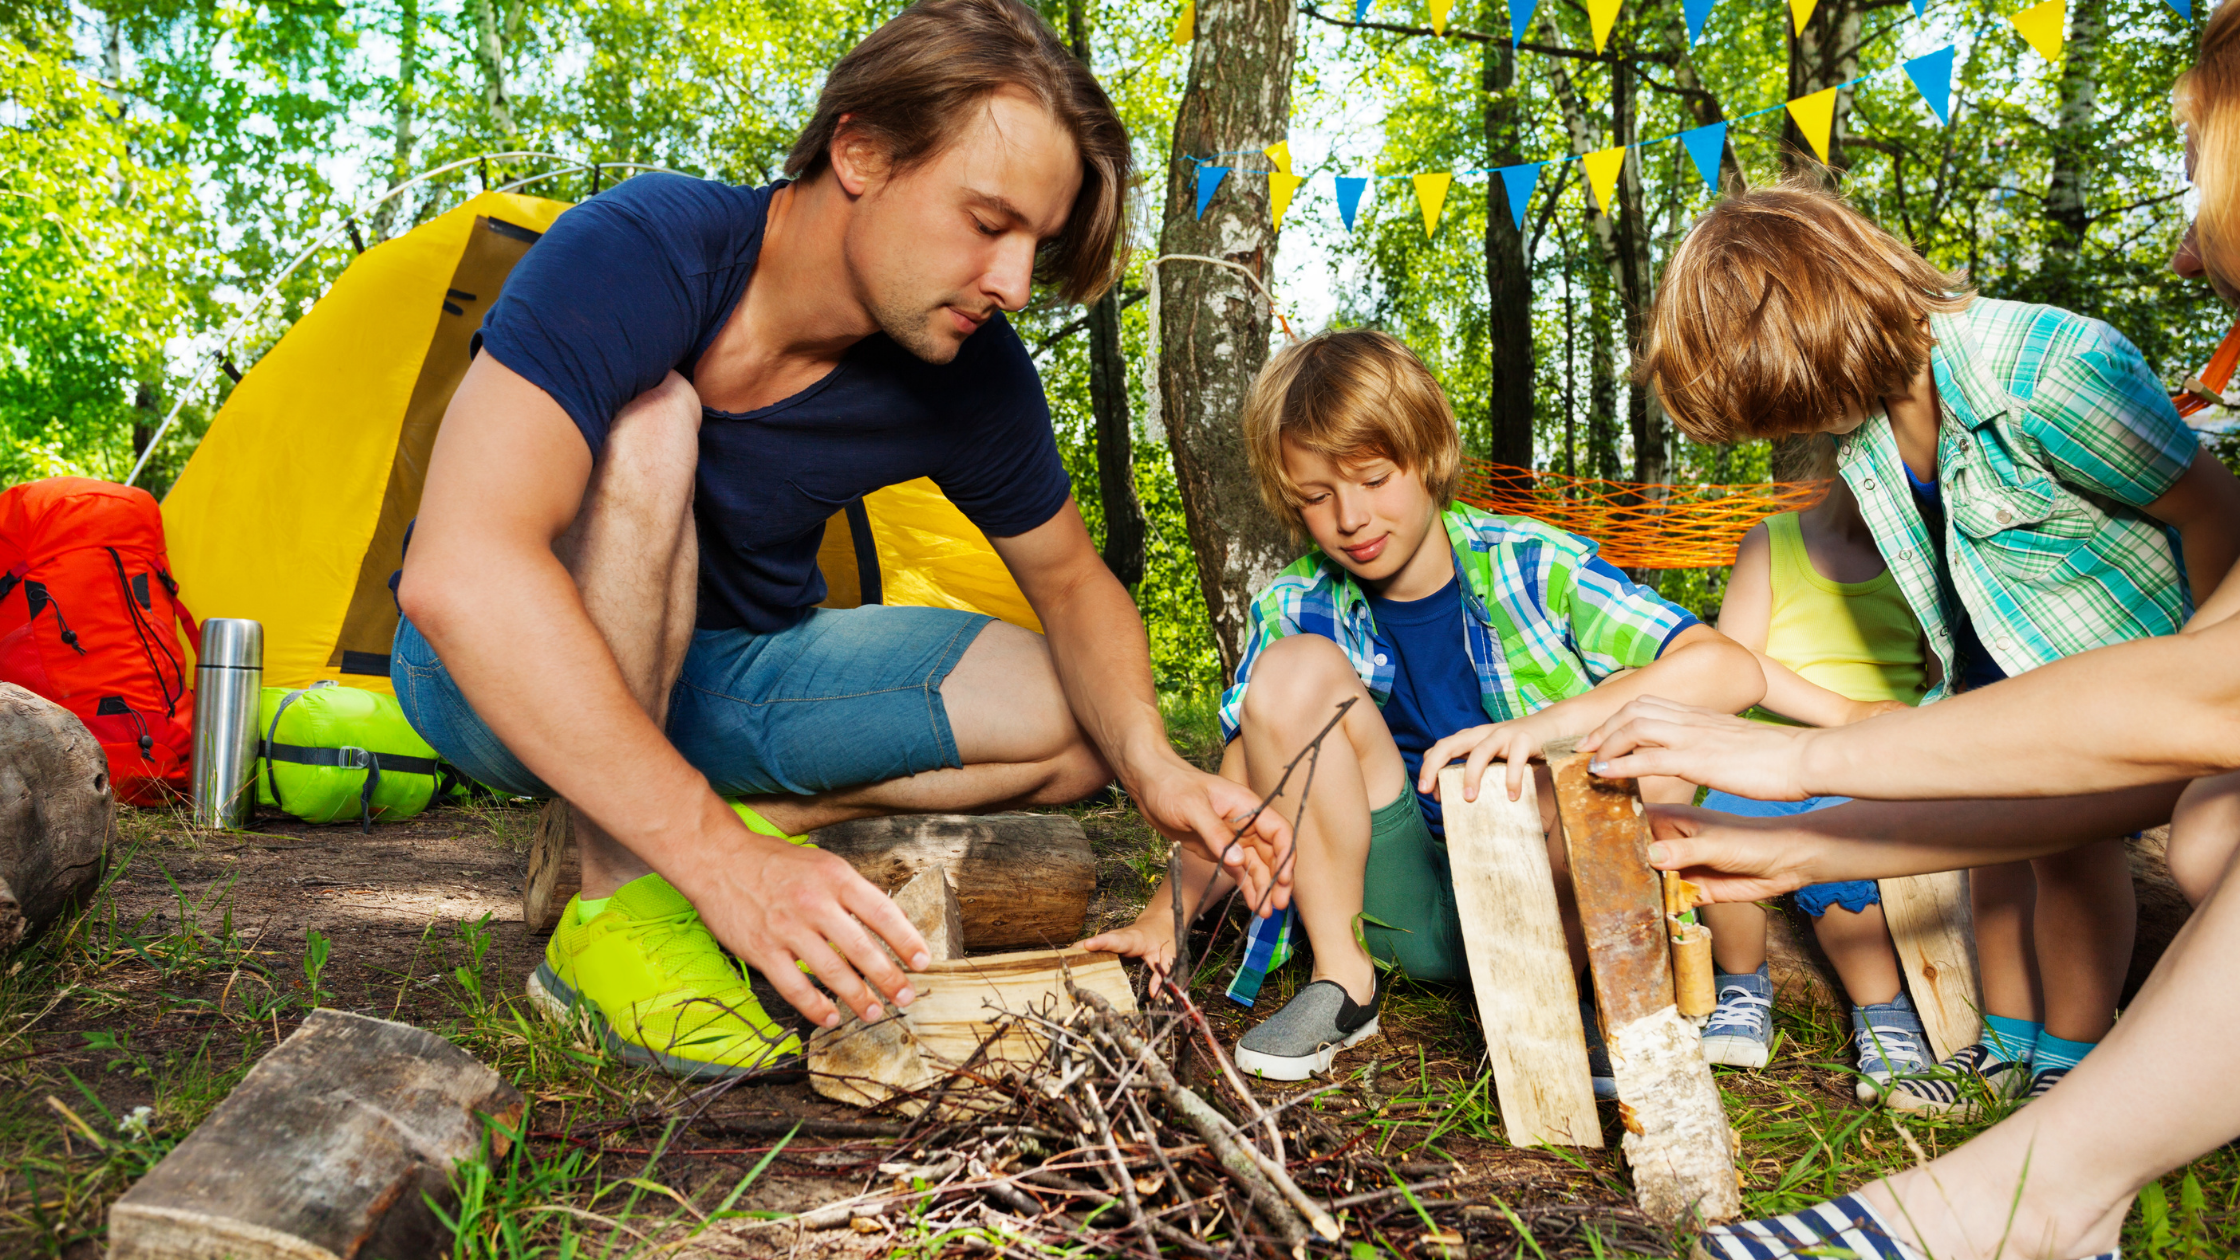 Find a camp. A Family Camping in the Forest. Teaching Kids to Care в походе. Australian Family Camp Fire. Camp with Family.